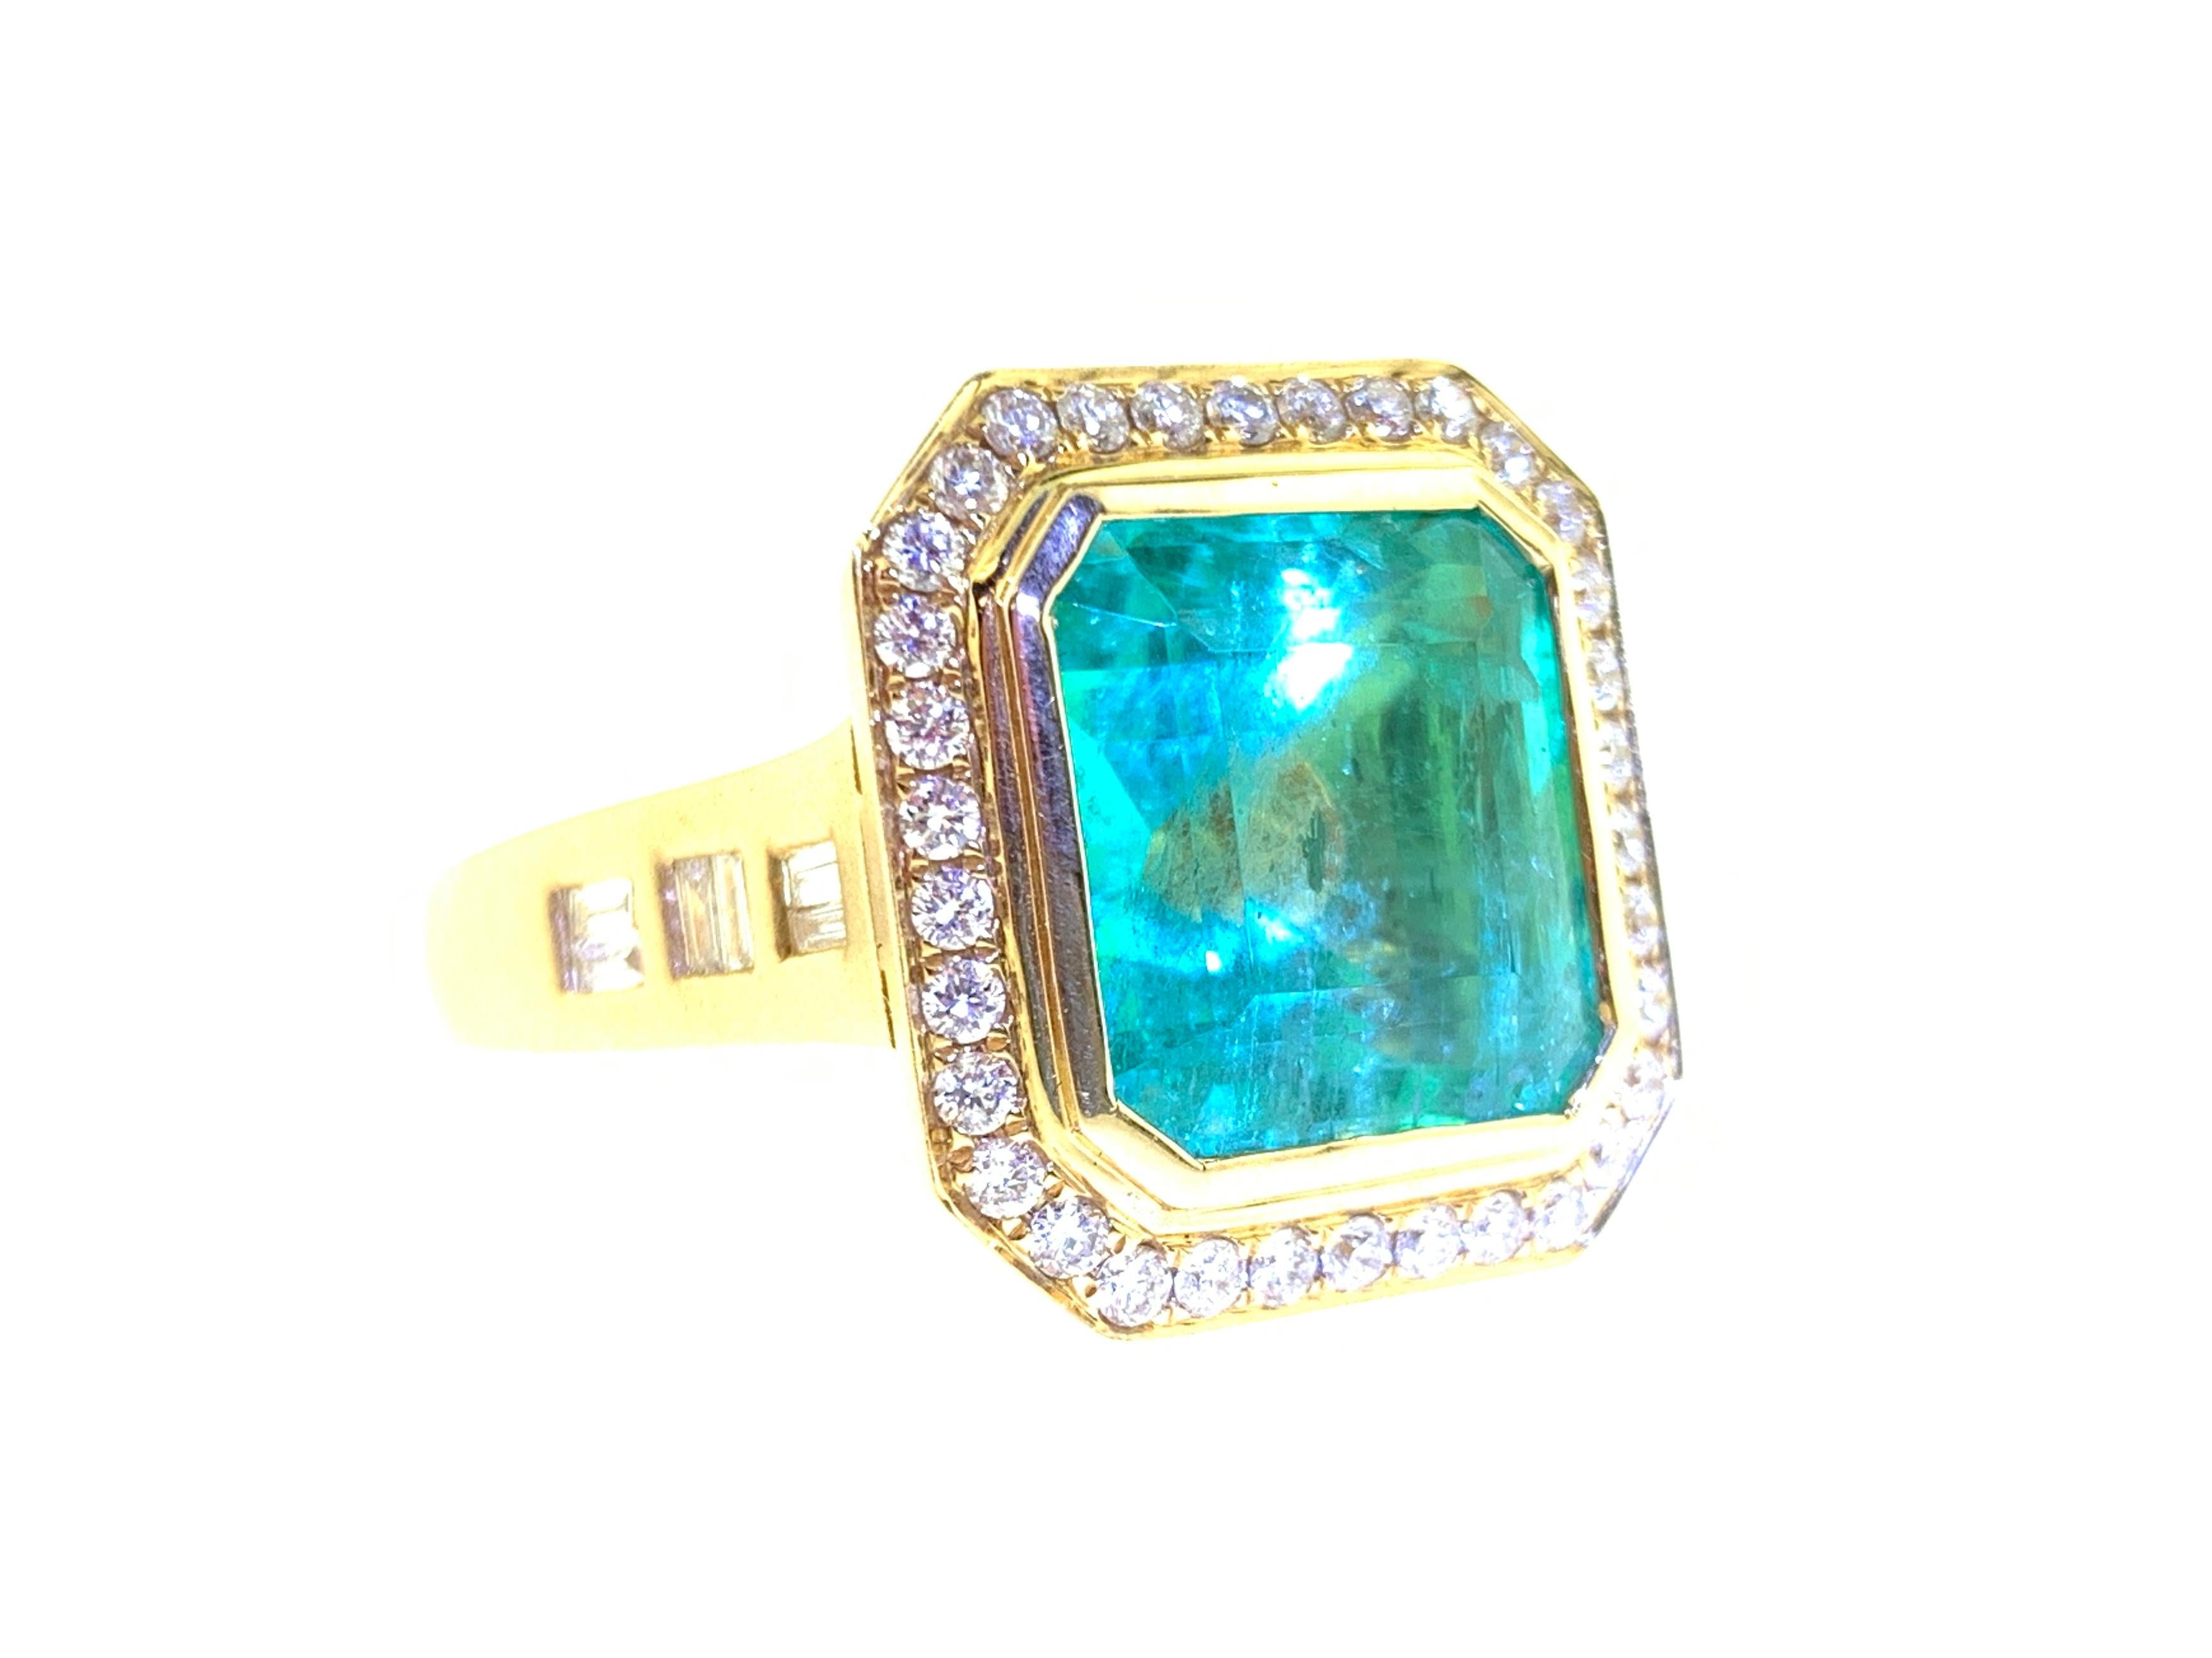 Emerald Cut GIA Certified 10.51 Carat Colombian Emerald and Diamond Cocktail Ring For Sale